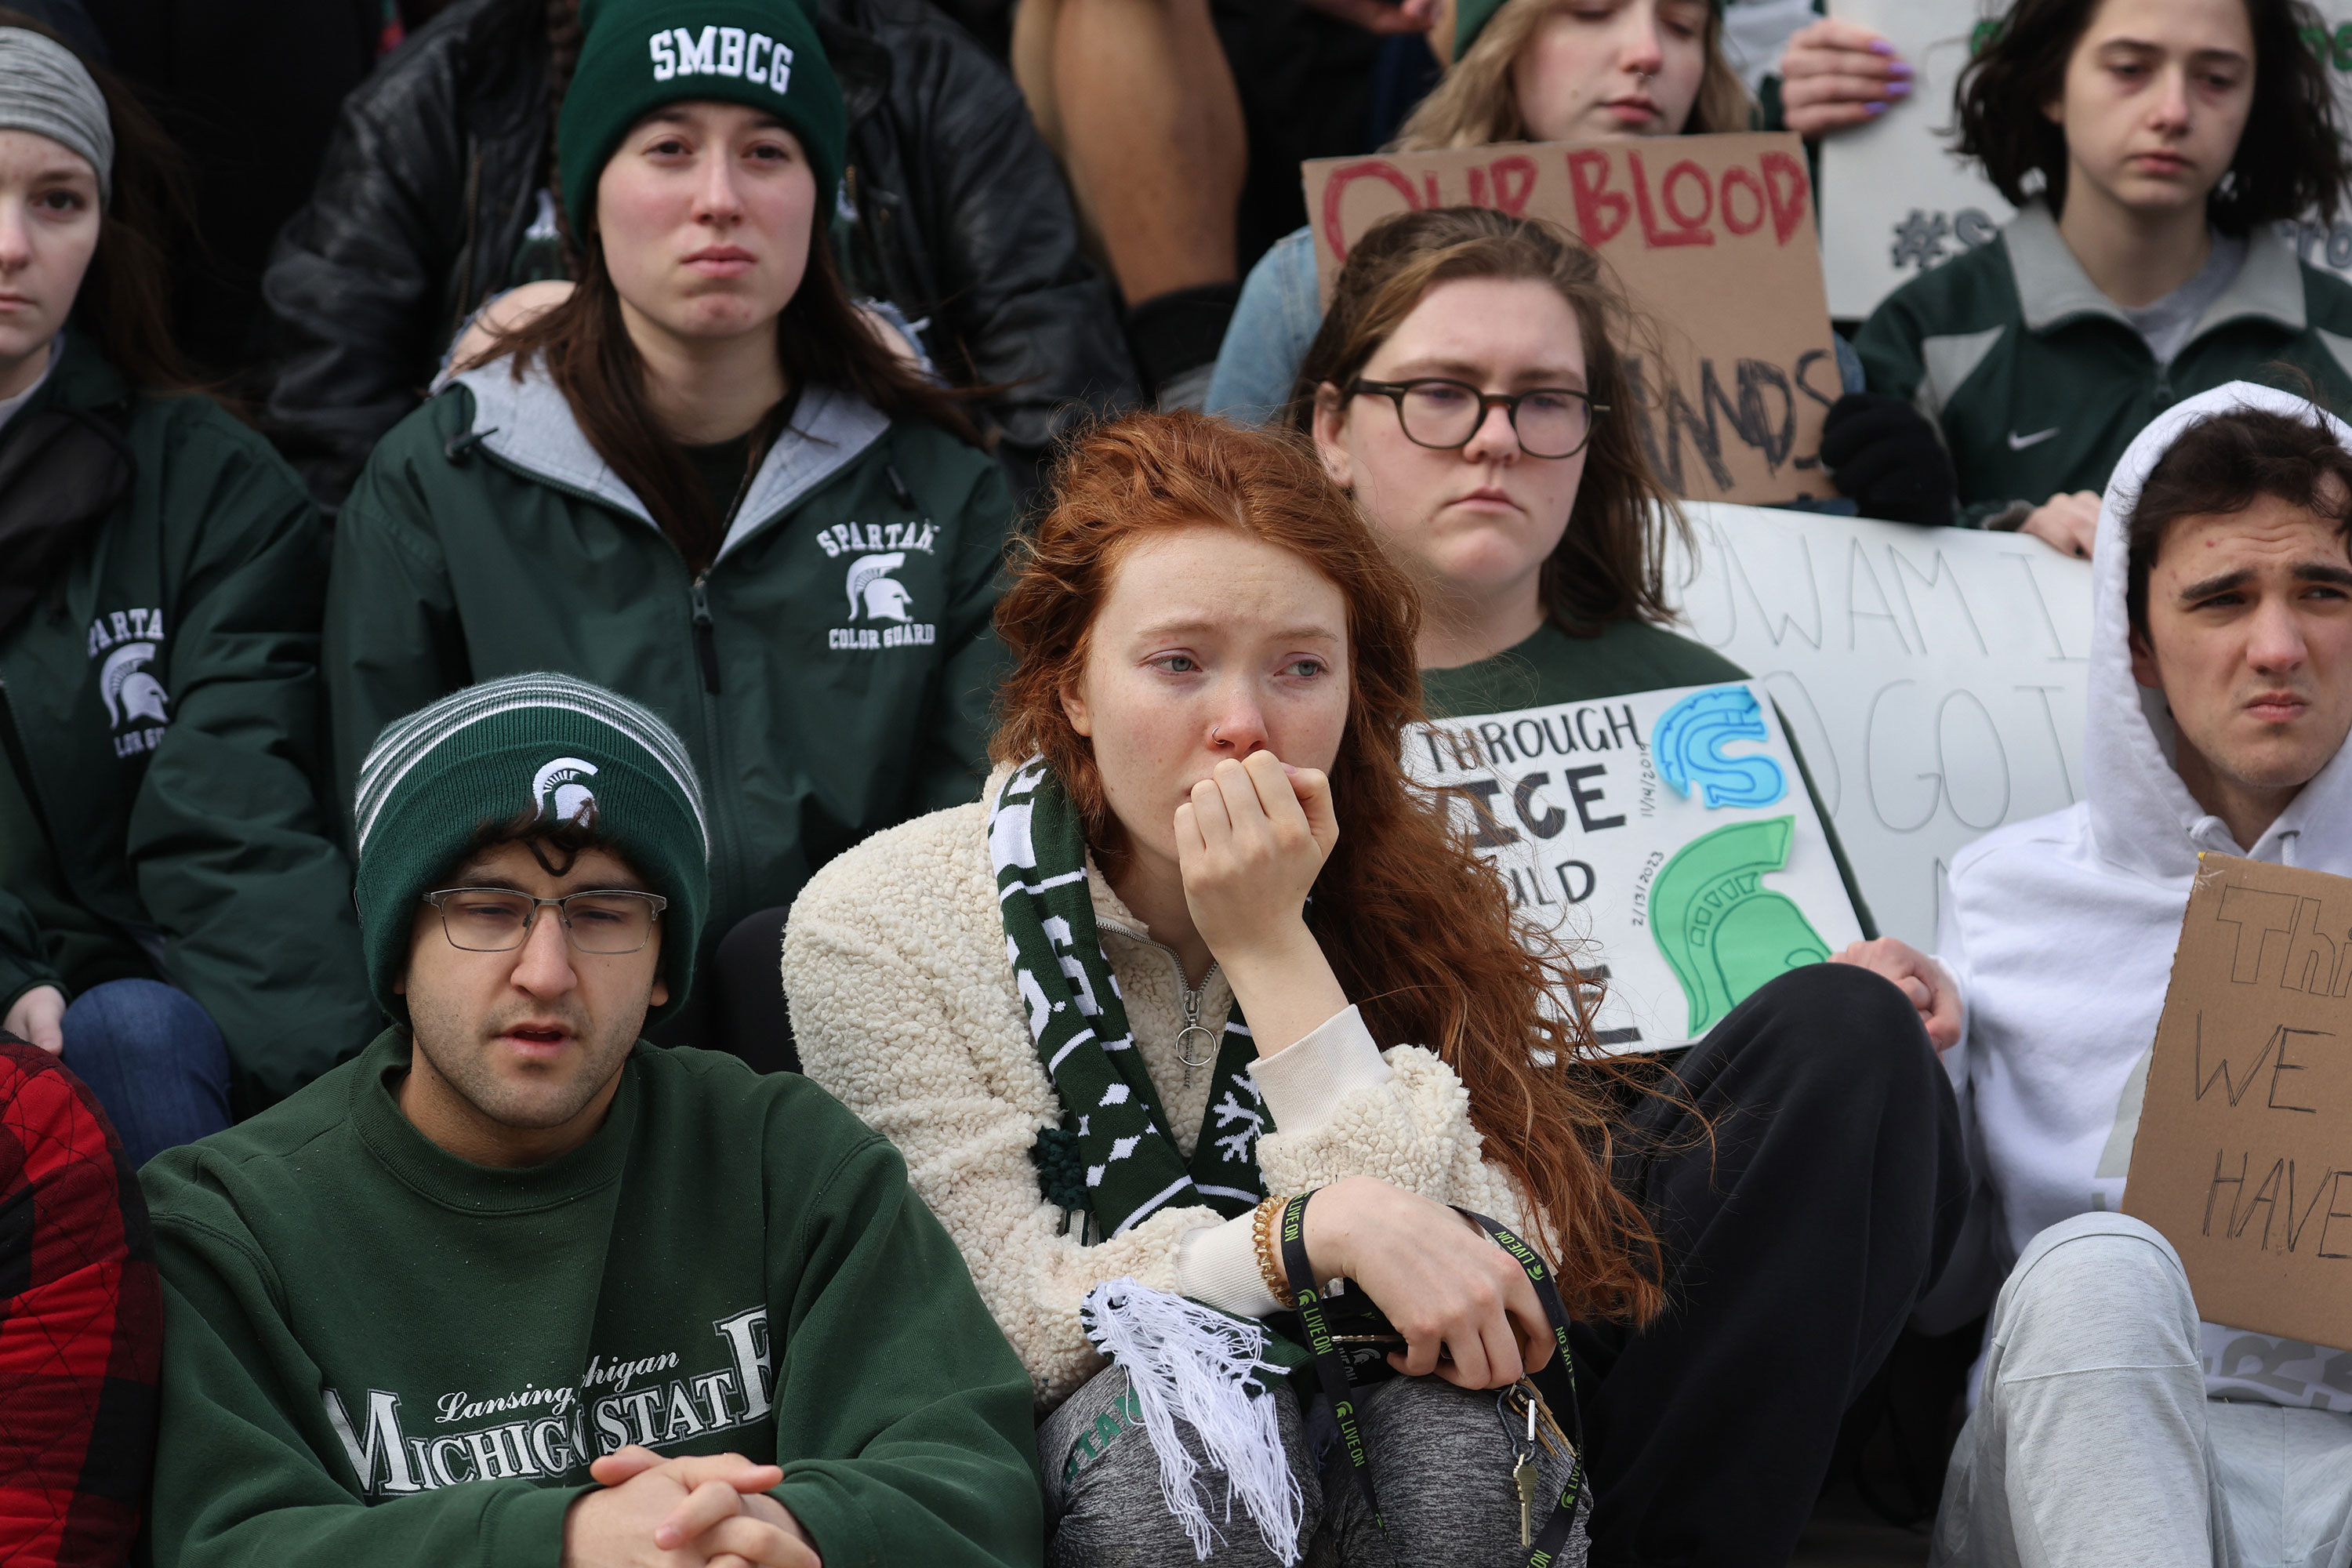 Current and former students from Michigan State University attend a rally outside of the state capitol building in Lansing, Michigan, on Wednesday.